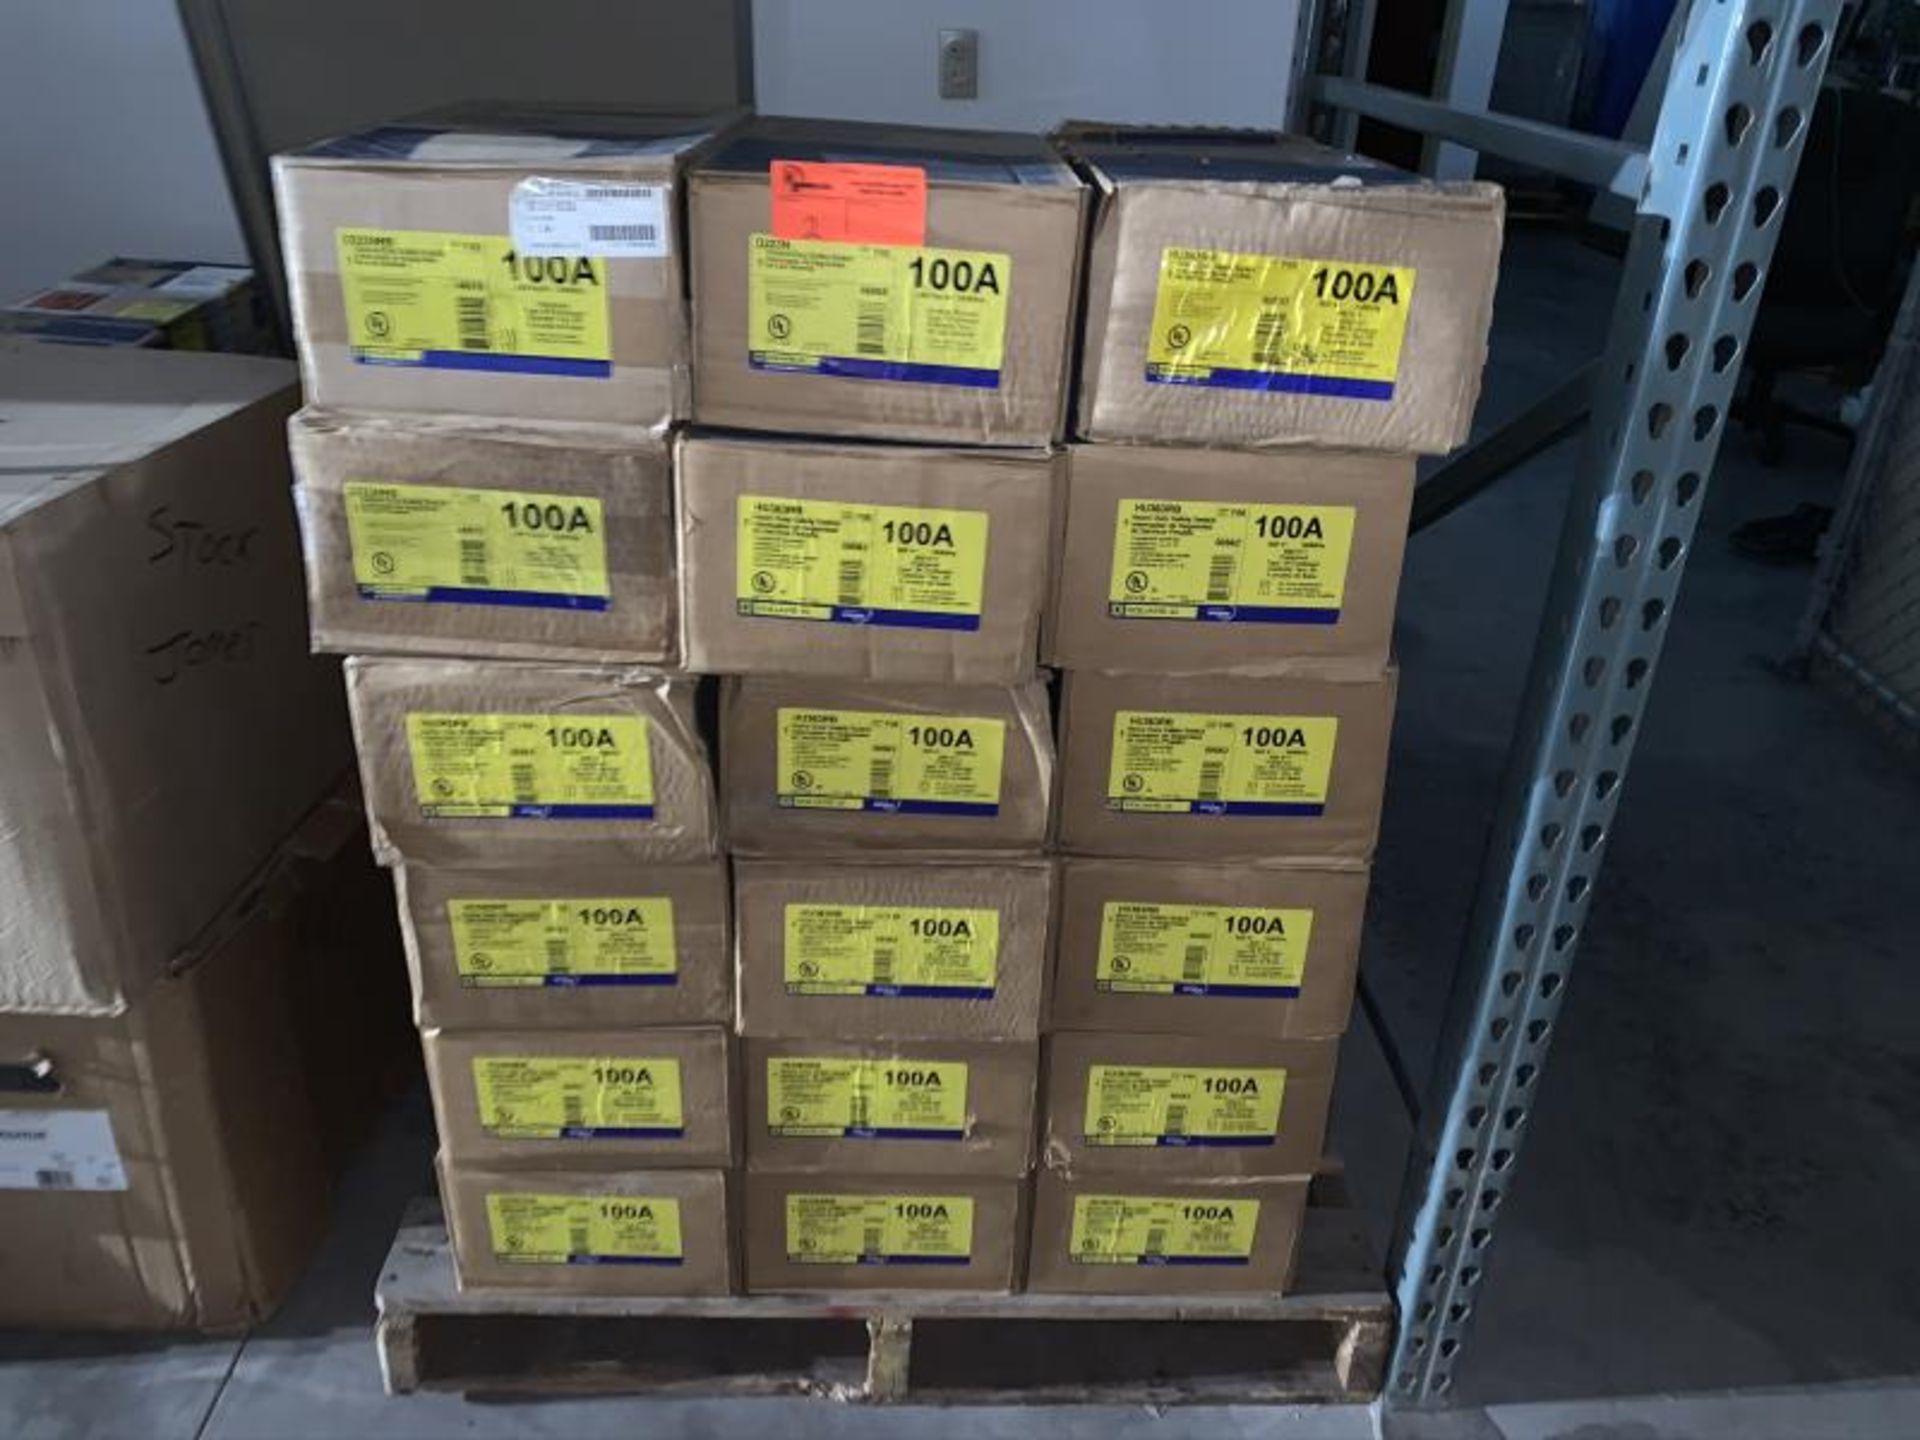 Pallet of 100A Square D General Duty Safety Switch